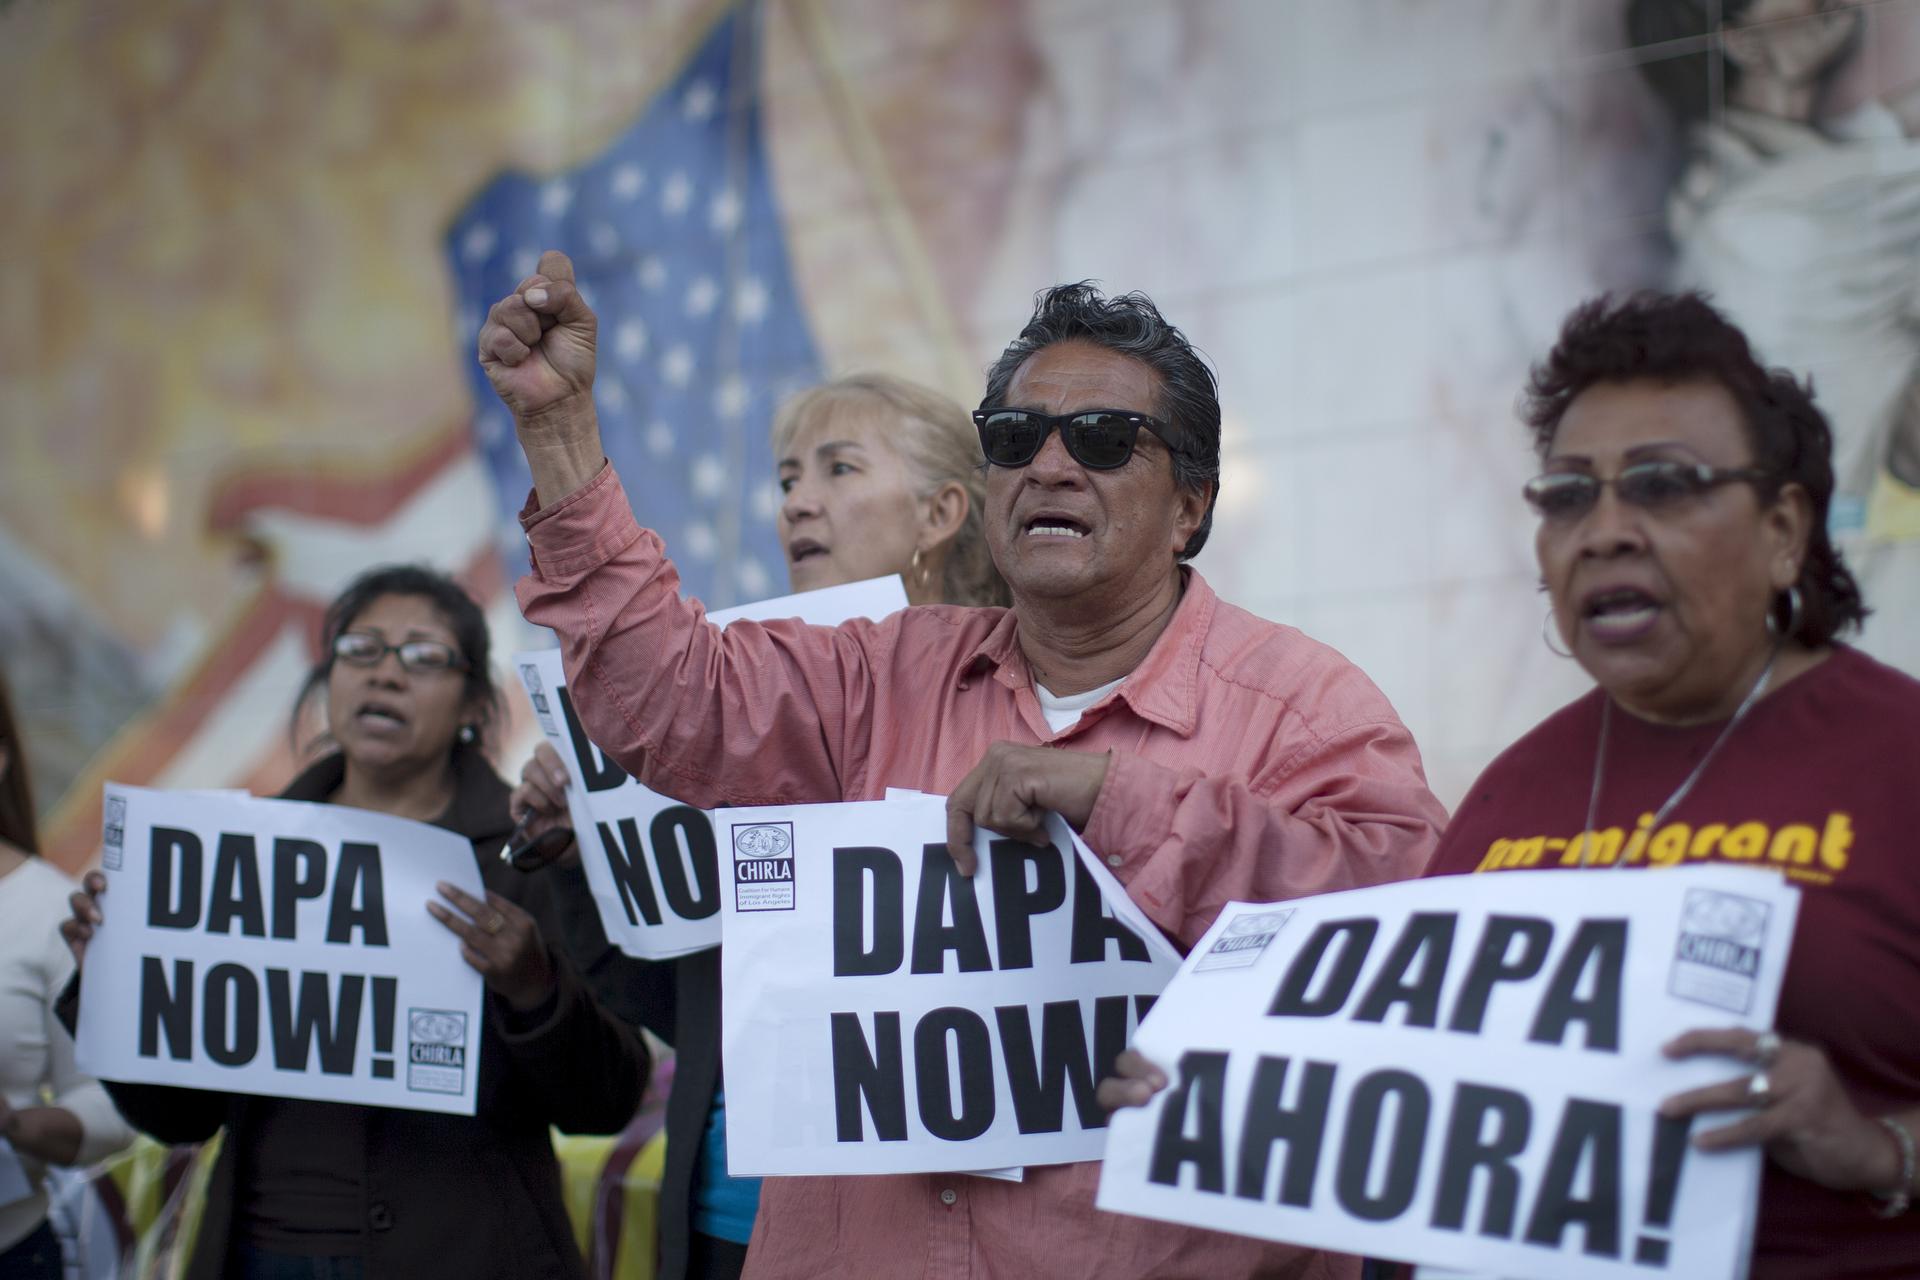 One man and three women hold signs that say "DAPA now!" and "DAPA Ahora!" before a wall covered with a mural, barely visible. 